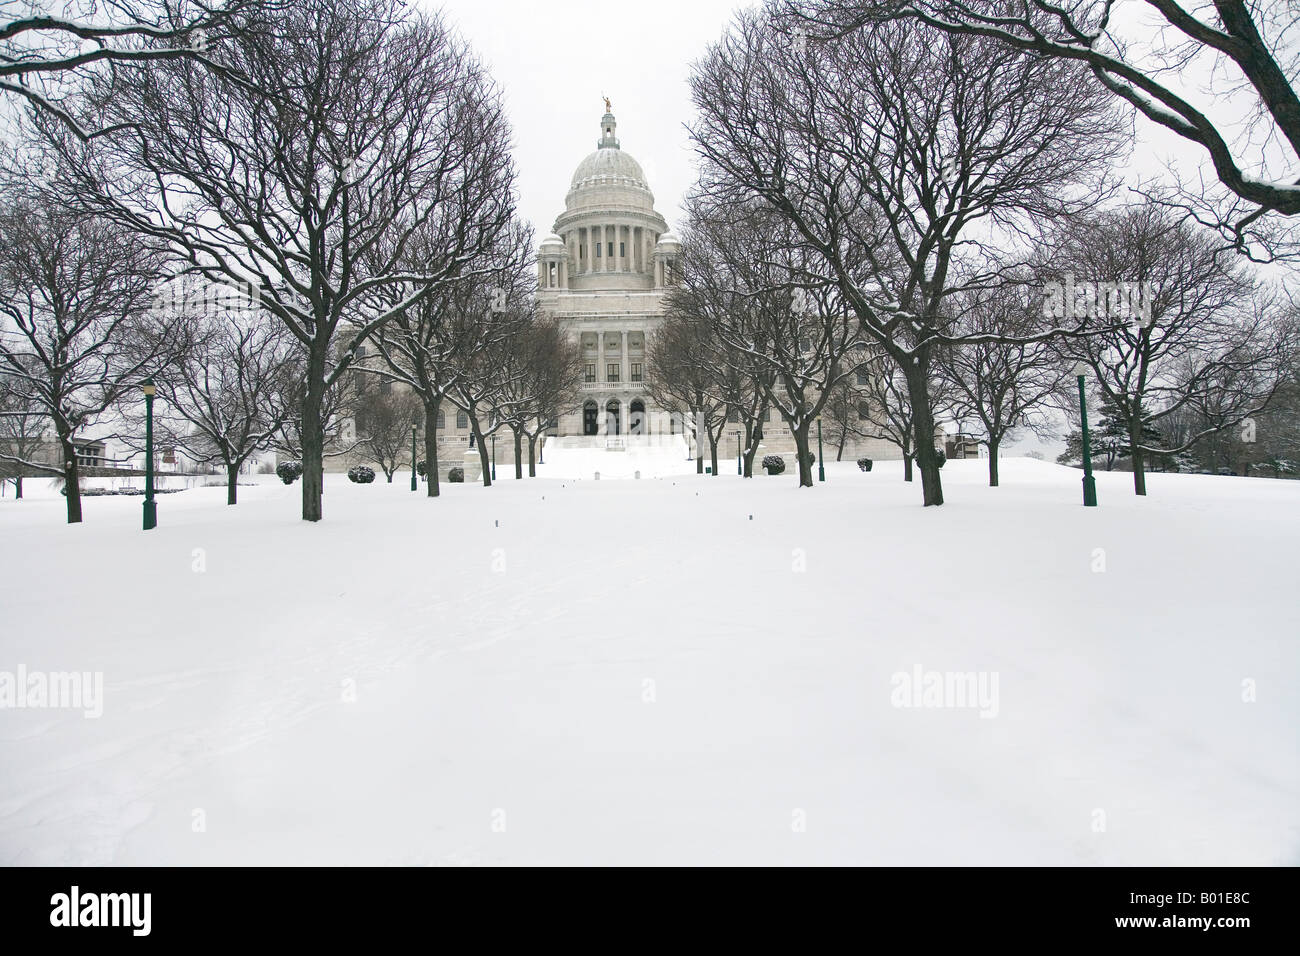 Photograph of the Rhode Island State House located in Providence.  Trees and snow line the walk to the building. Stock Photo